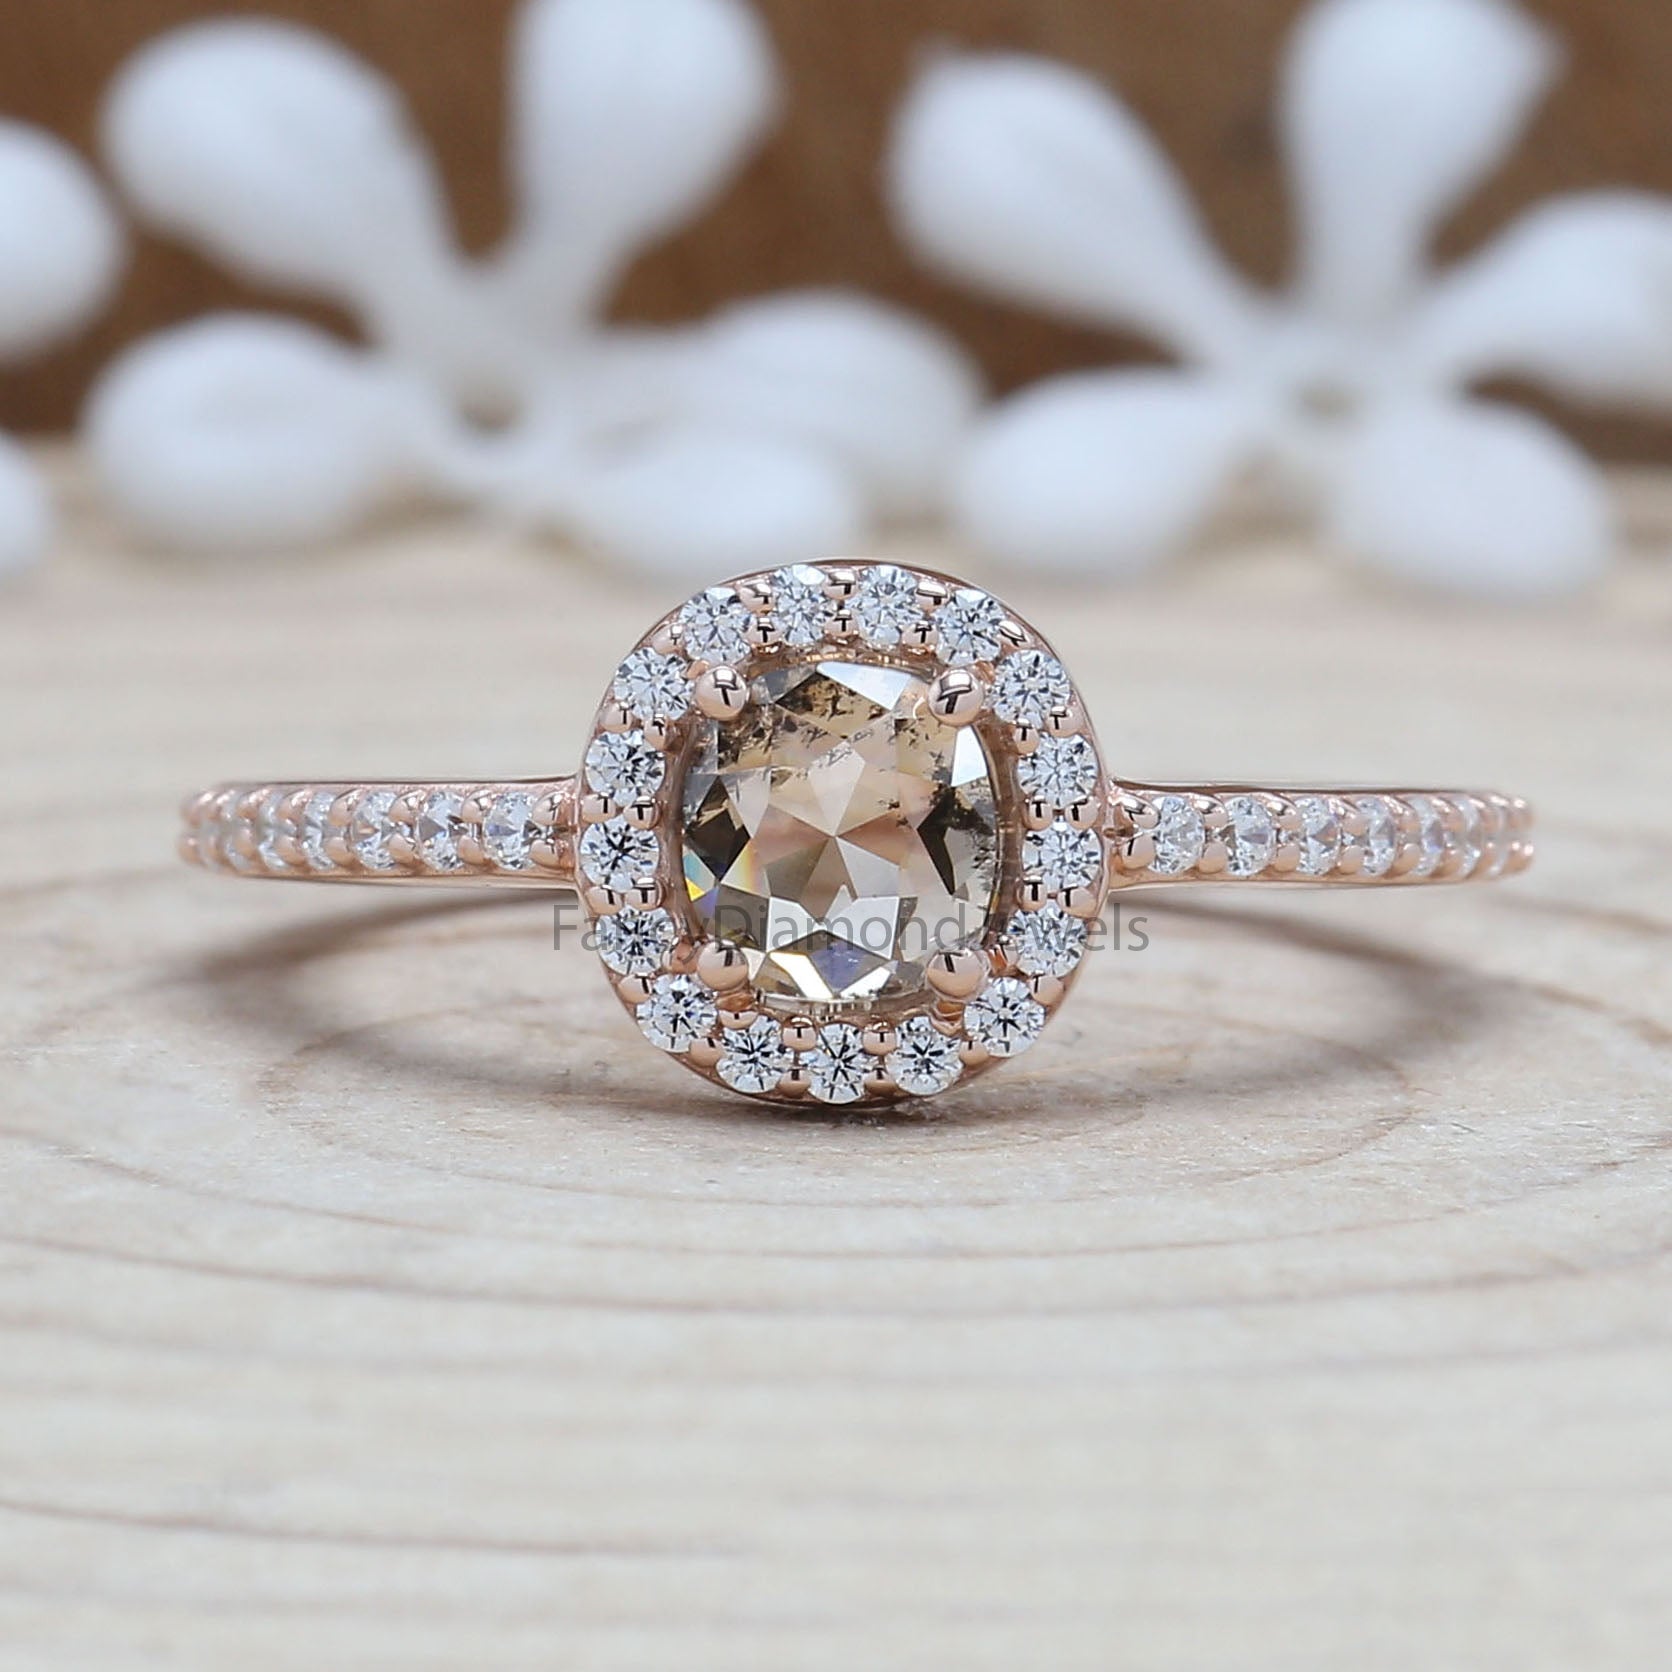 Cushion Cut Salt And Pepper Diamond Ring 0.76 Ct 5.20 MM Cushion Diamond Ring 14K Solid Rose Gold Silver Engagement Ring Gift For Her QN9868